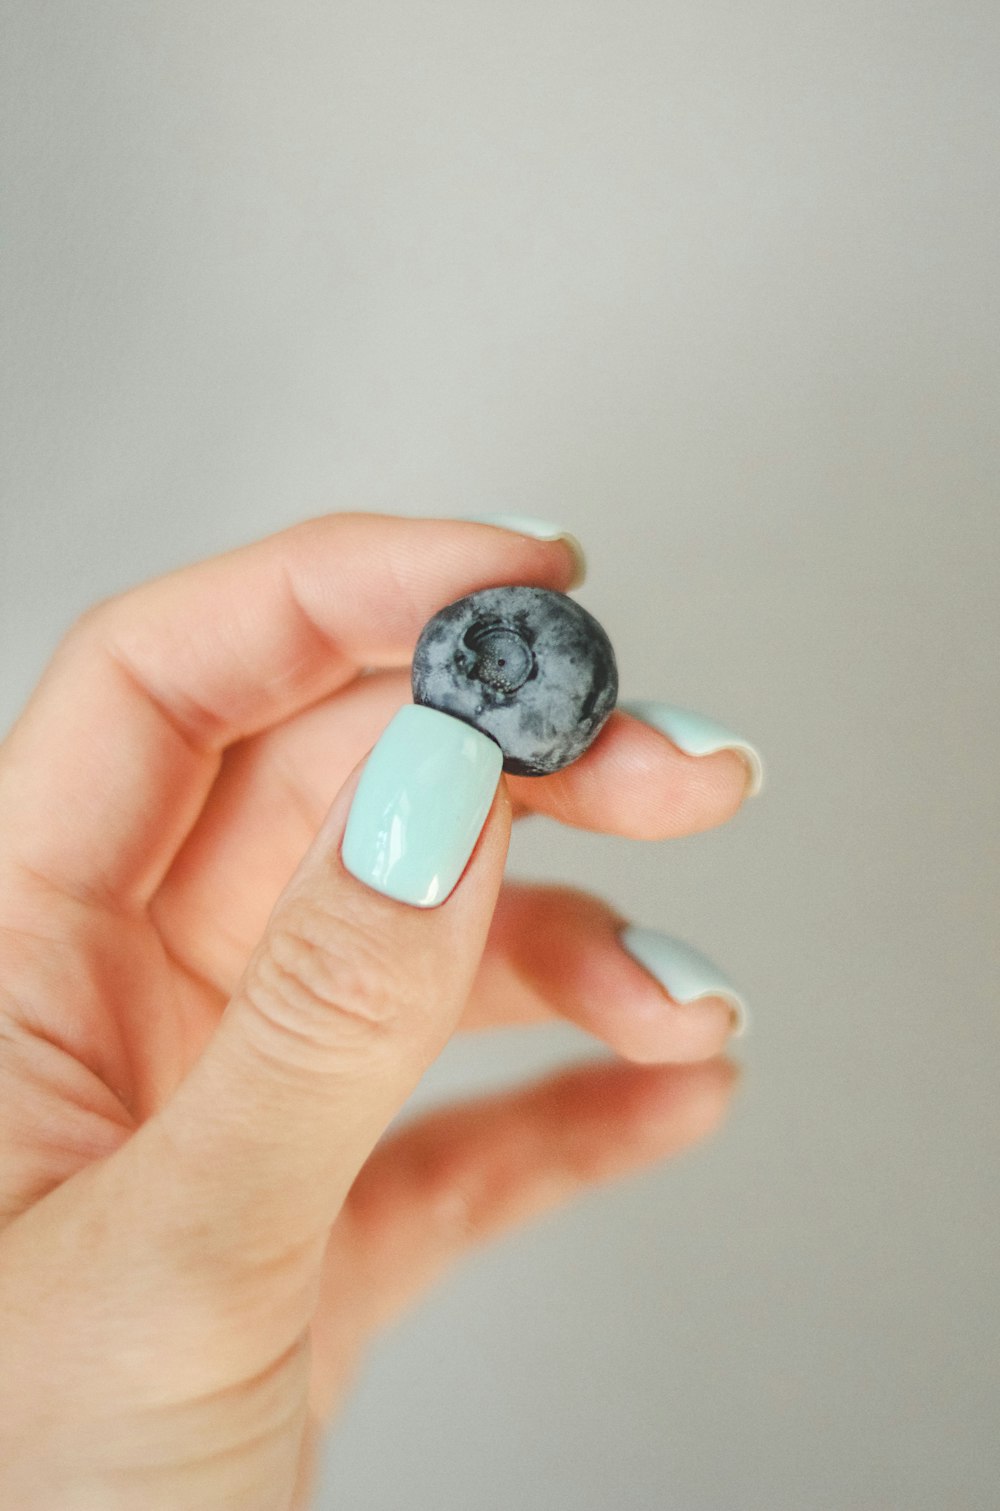 a hand holding a small blue and white object